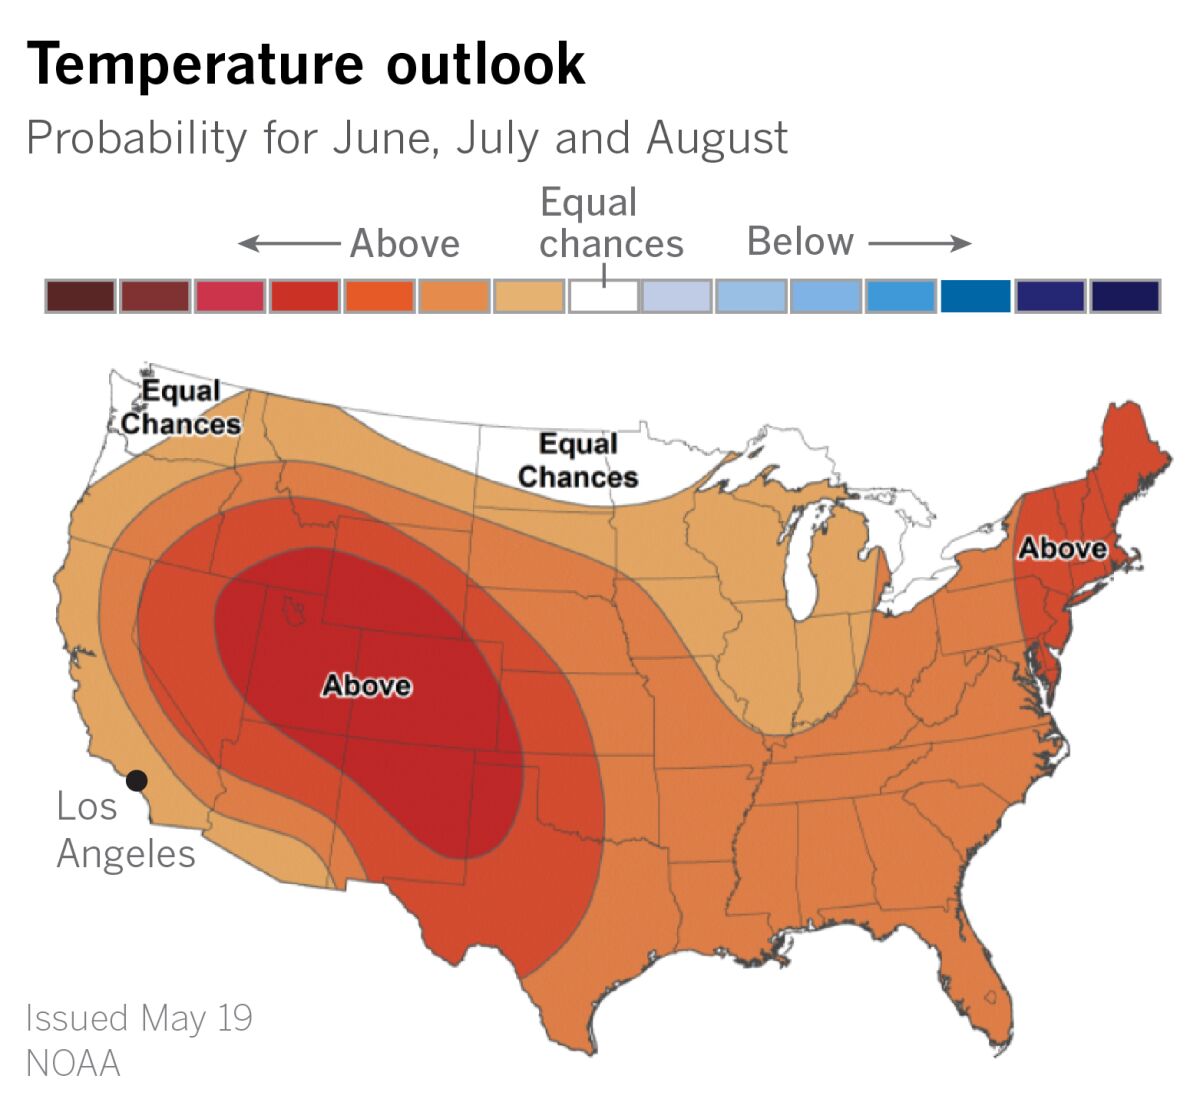 Temperature outlook map for June, July and August.